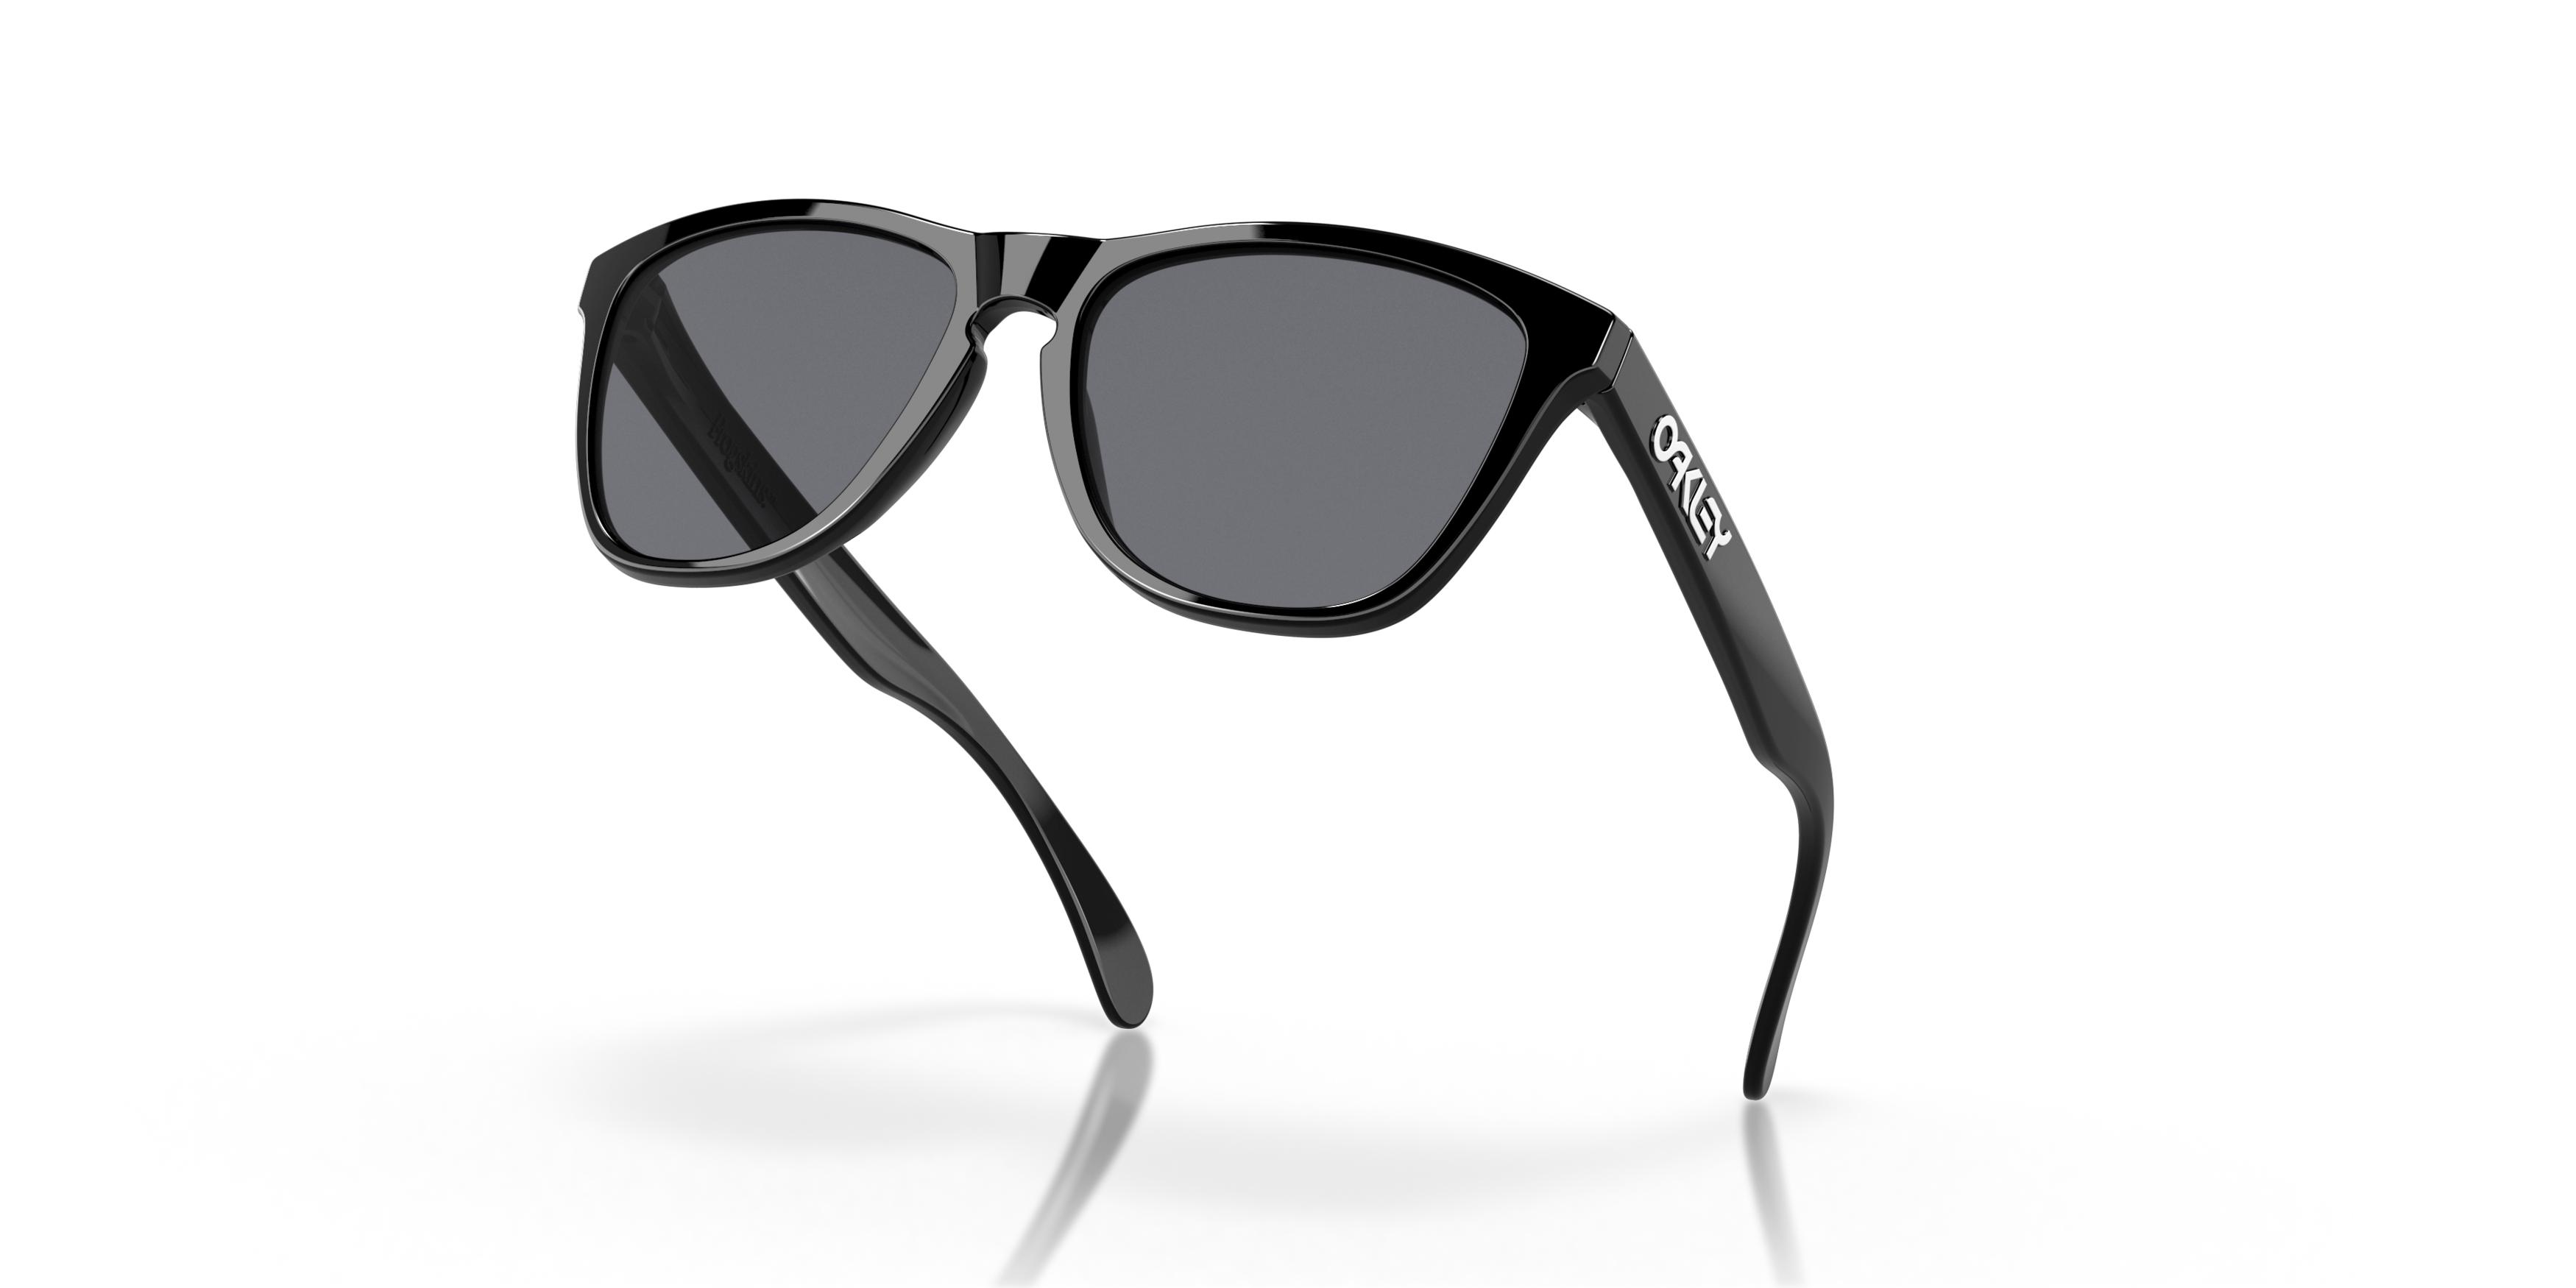 [products.image.bottom_up] Oakley FROGSKINS OO9013 24-306